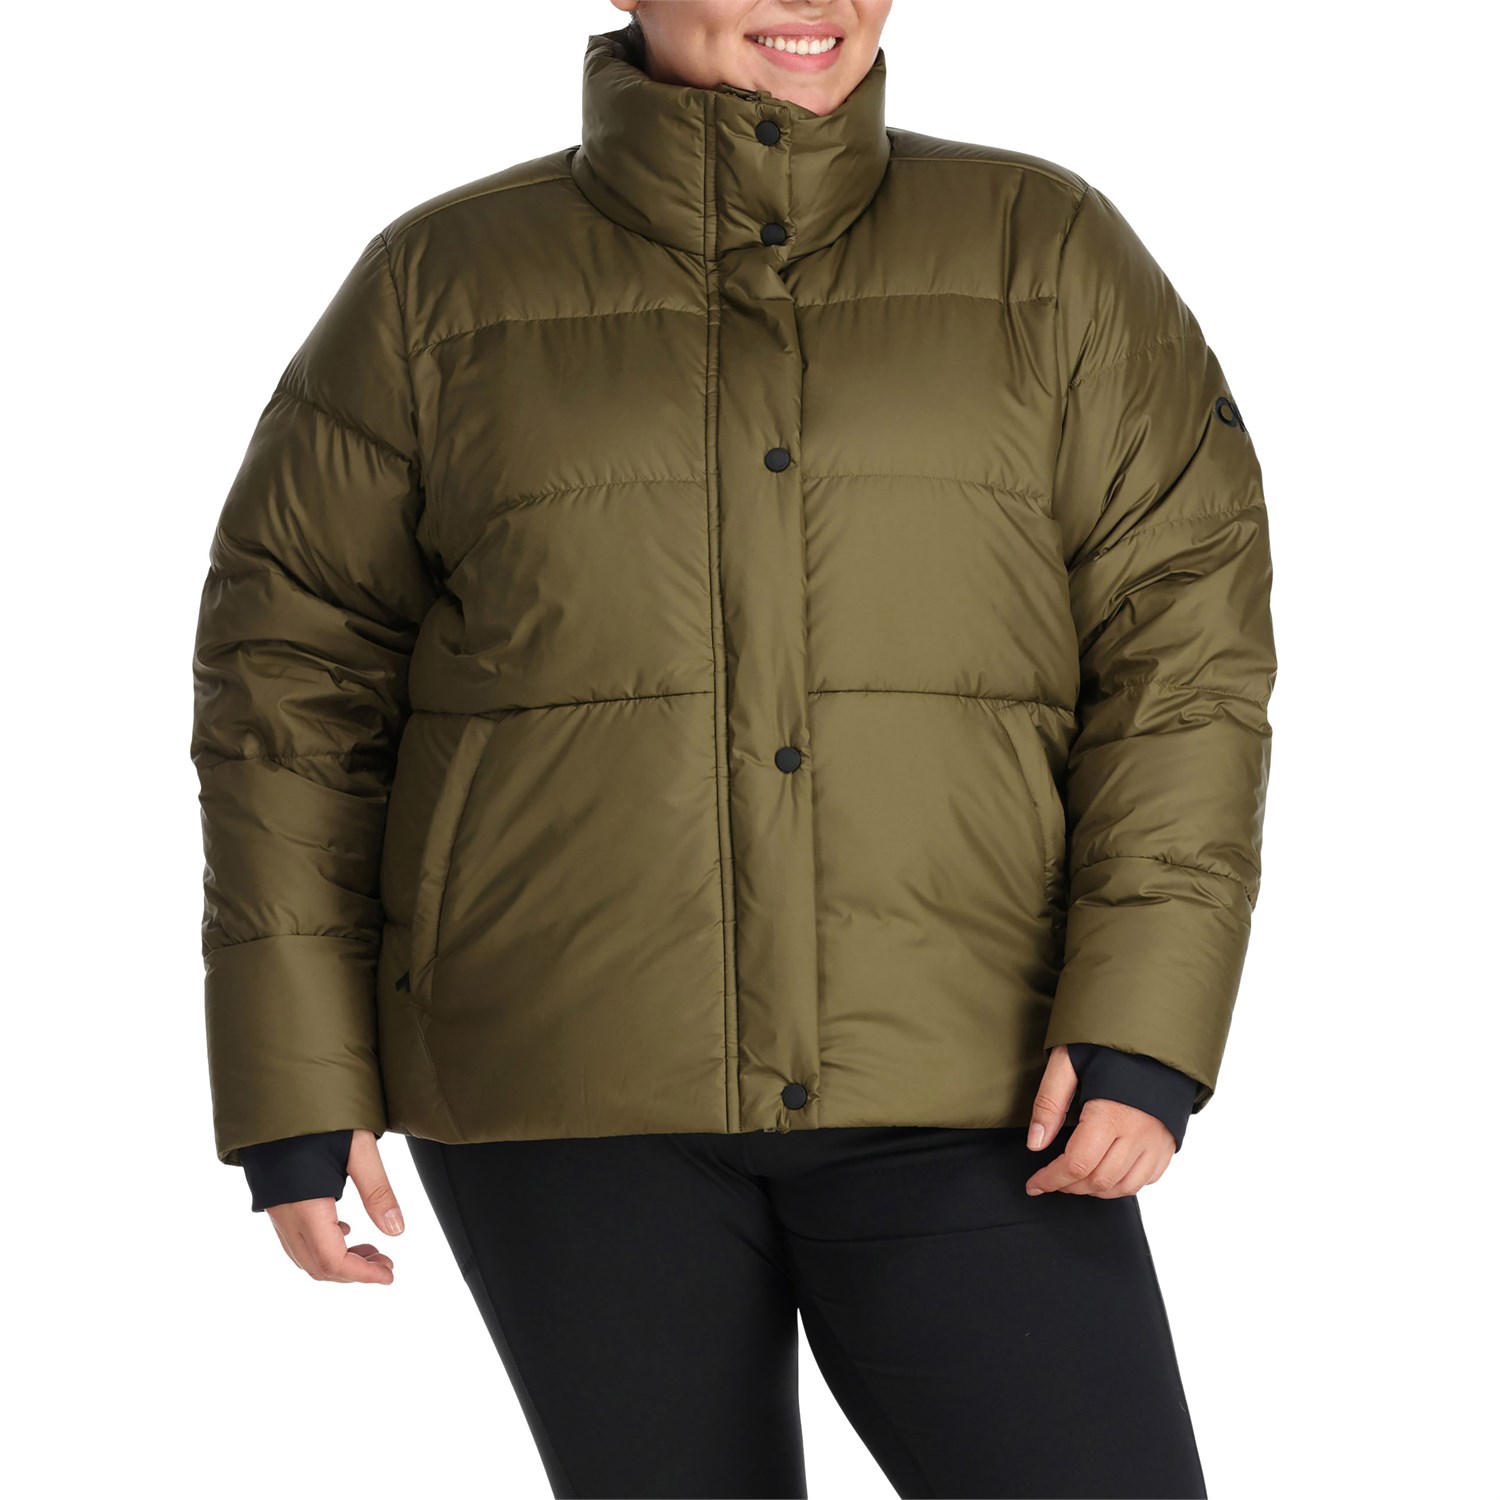 Пуховик Outdoor Research Coldfront Plus - женские, loden